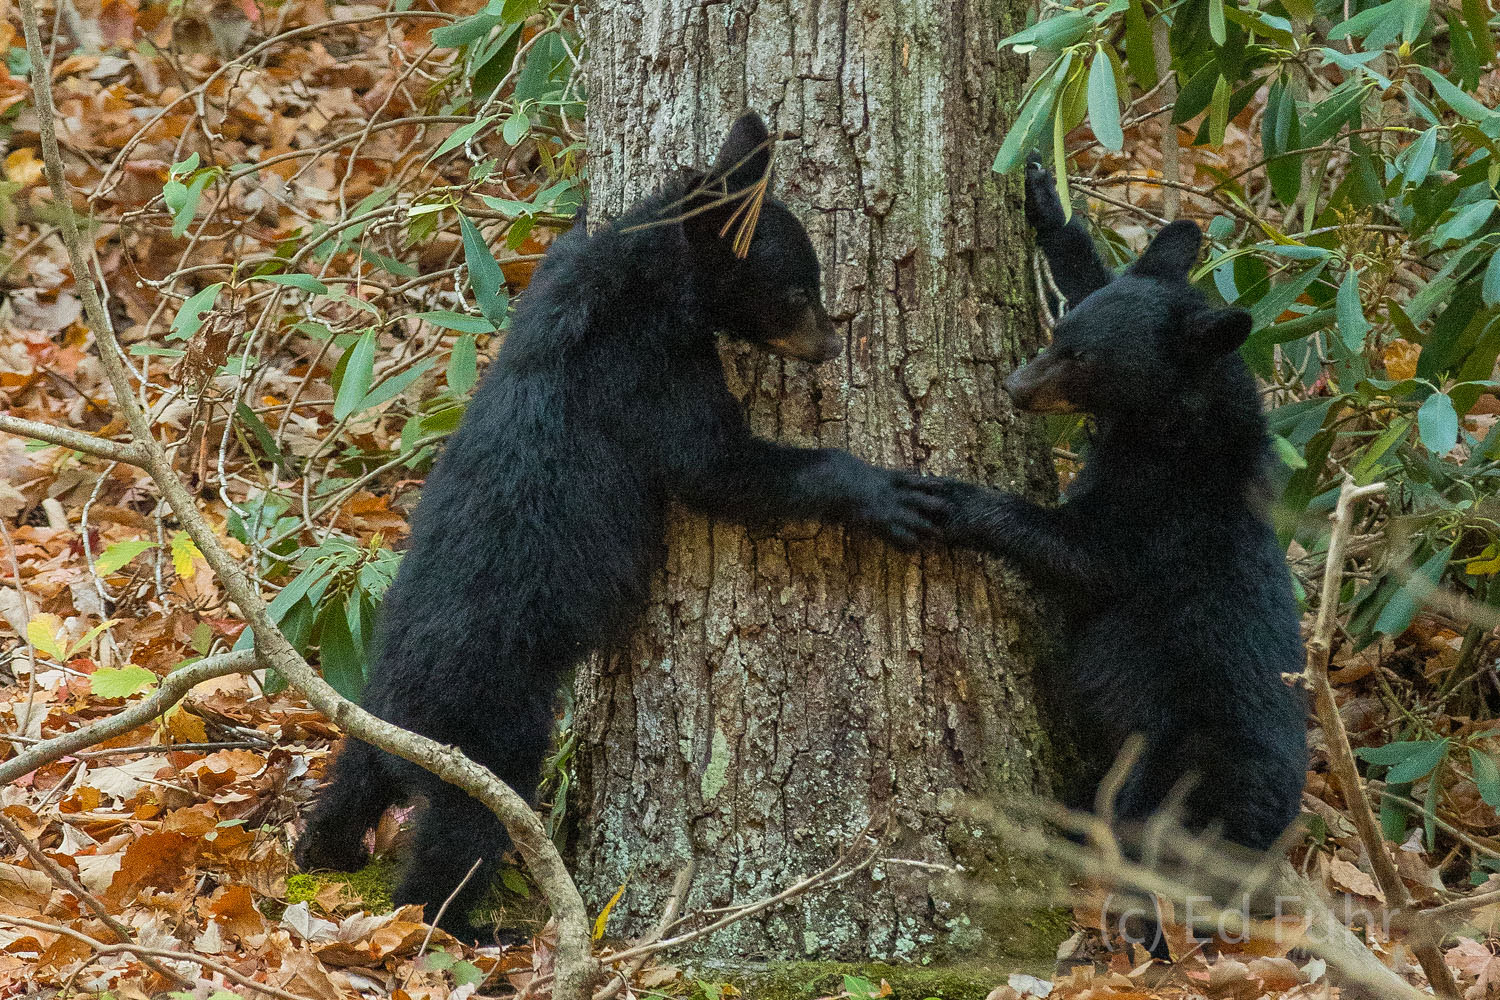 Two cubs shake before they compete in their tree climbing escapades.